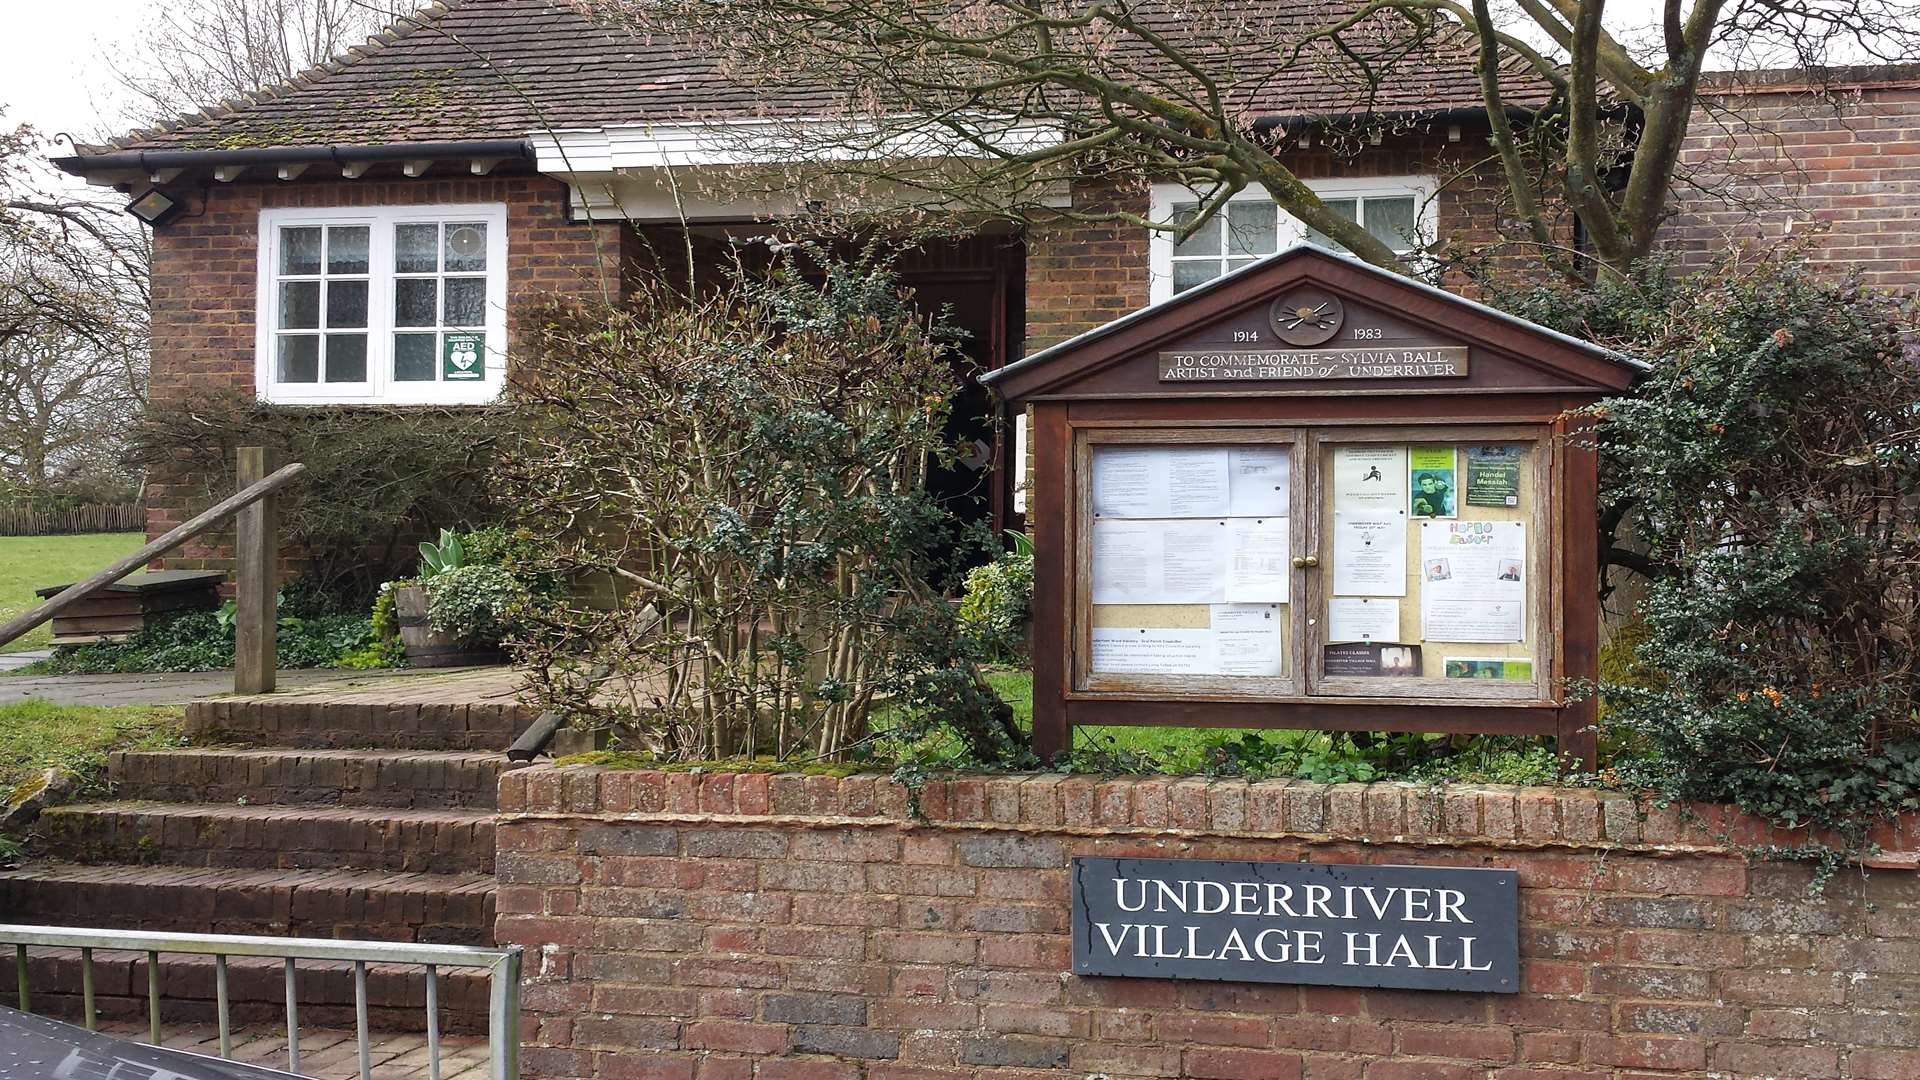 Underriver village hall has broadband speeds of more than 1 gbps